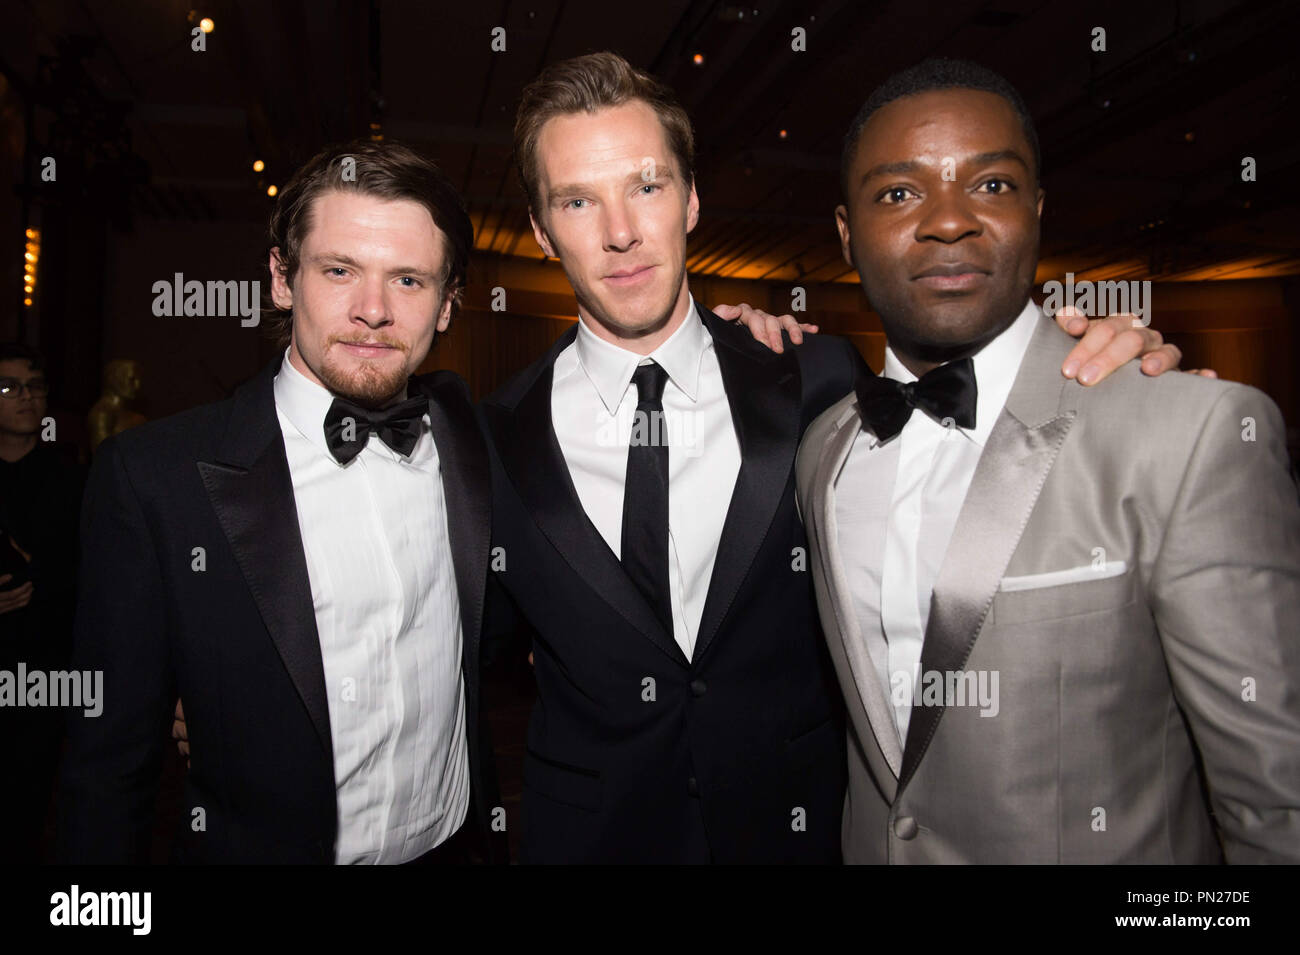 Jack O'Connell (left), Benedict Cumberbatch (center) and David Oyelowo attend the 6th Annual Governors Awards in The Ray Dolby Ballroom at Hollywood & Highland Center® in Hollywood, CA, on Saturday, November 8, 2014.  File Reference # 32487 181THA  For Editorial Use Only -  All Rights Reserved Stock Photo